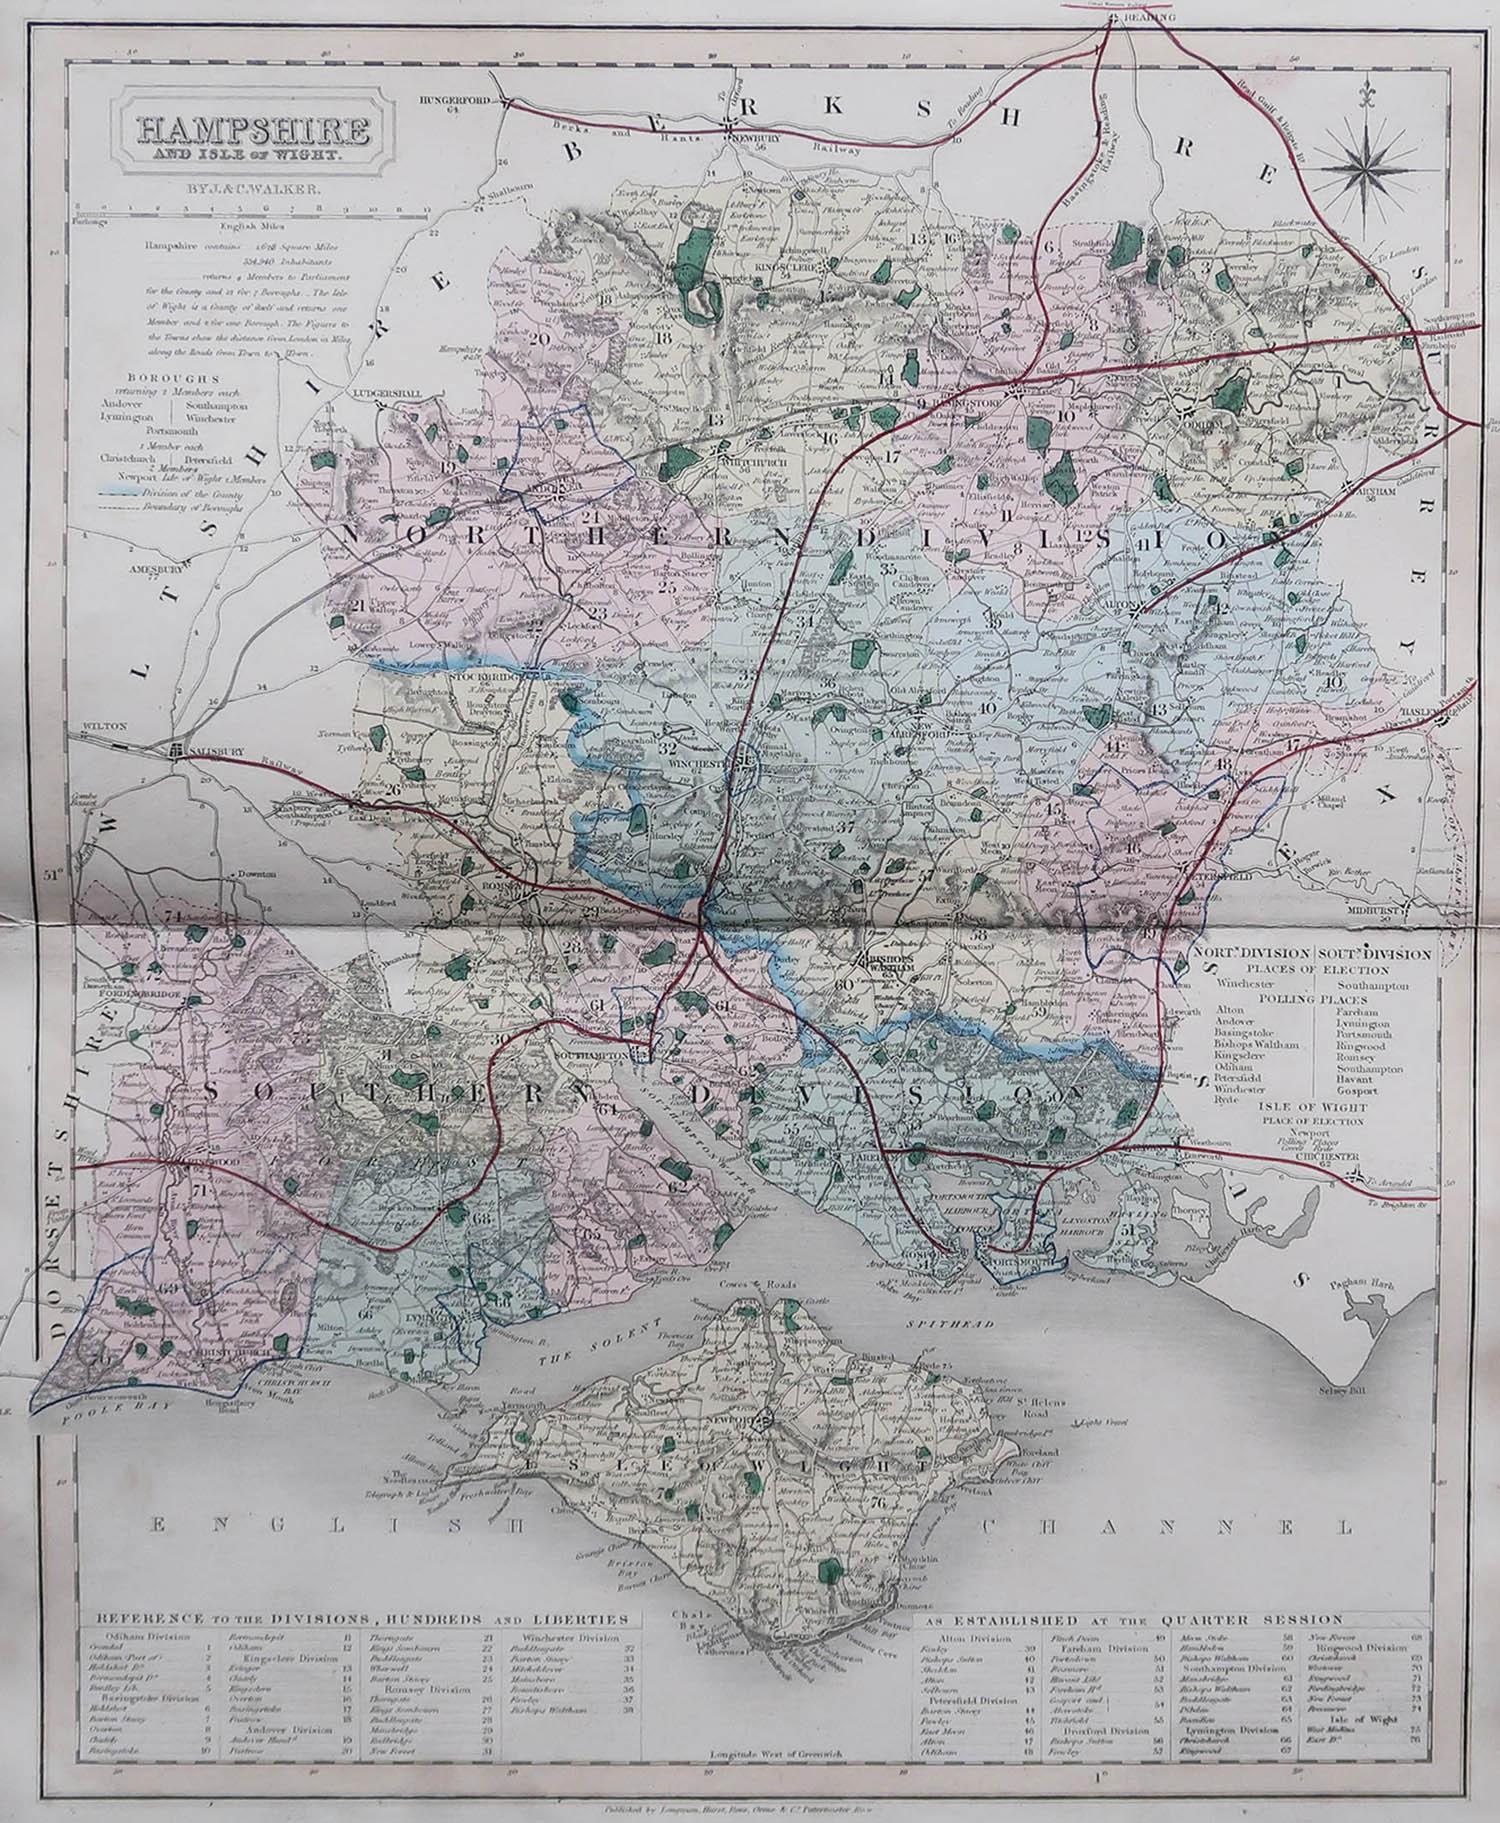 Great map of Hampshire

Original colour

By J & C Walker

Published by Longman, Rees, Orme, Brown & Co. 1851

Unframed.




